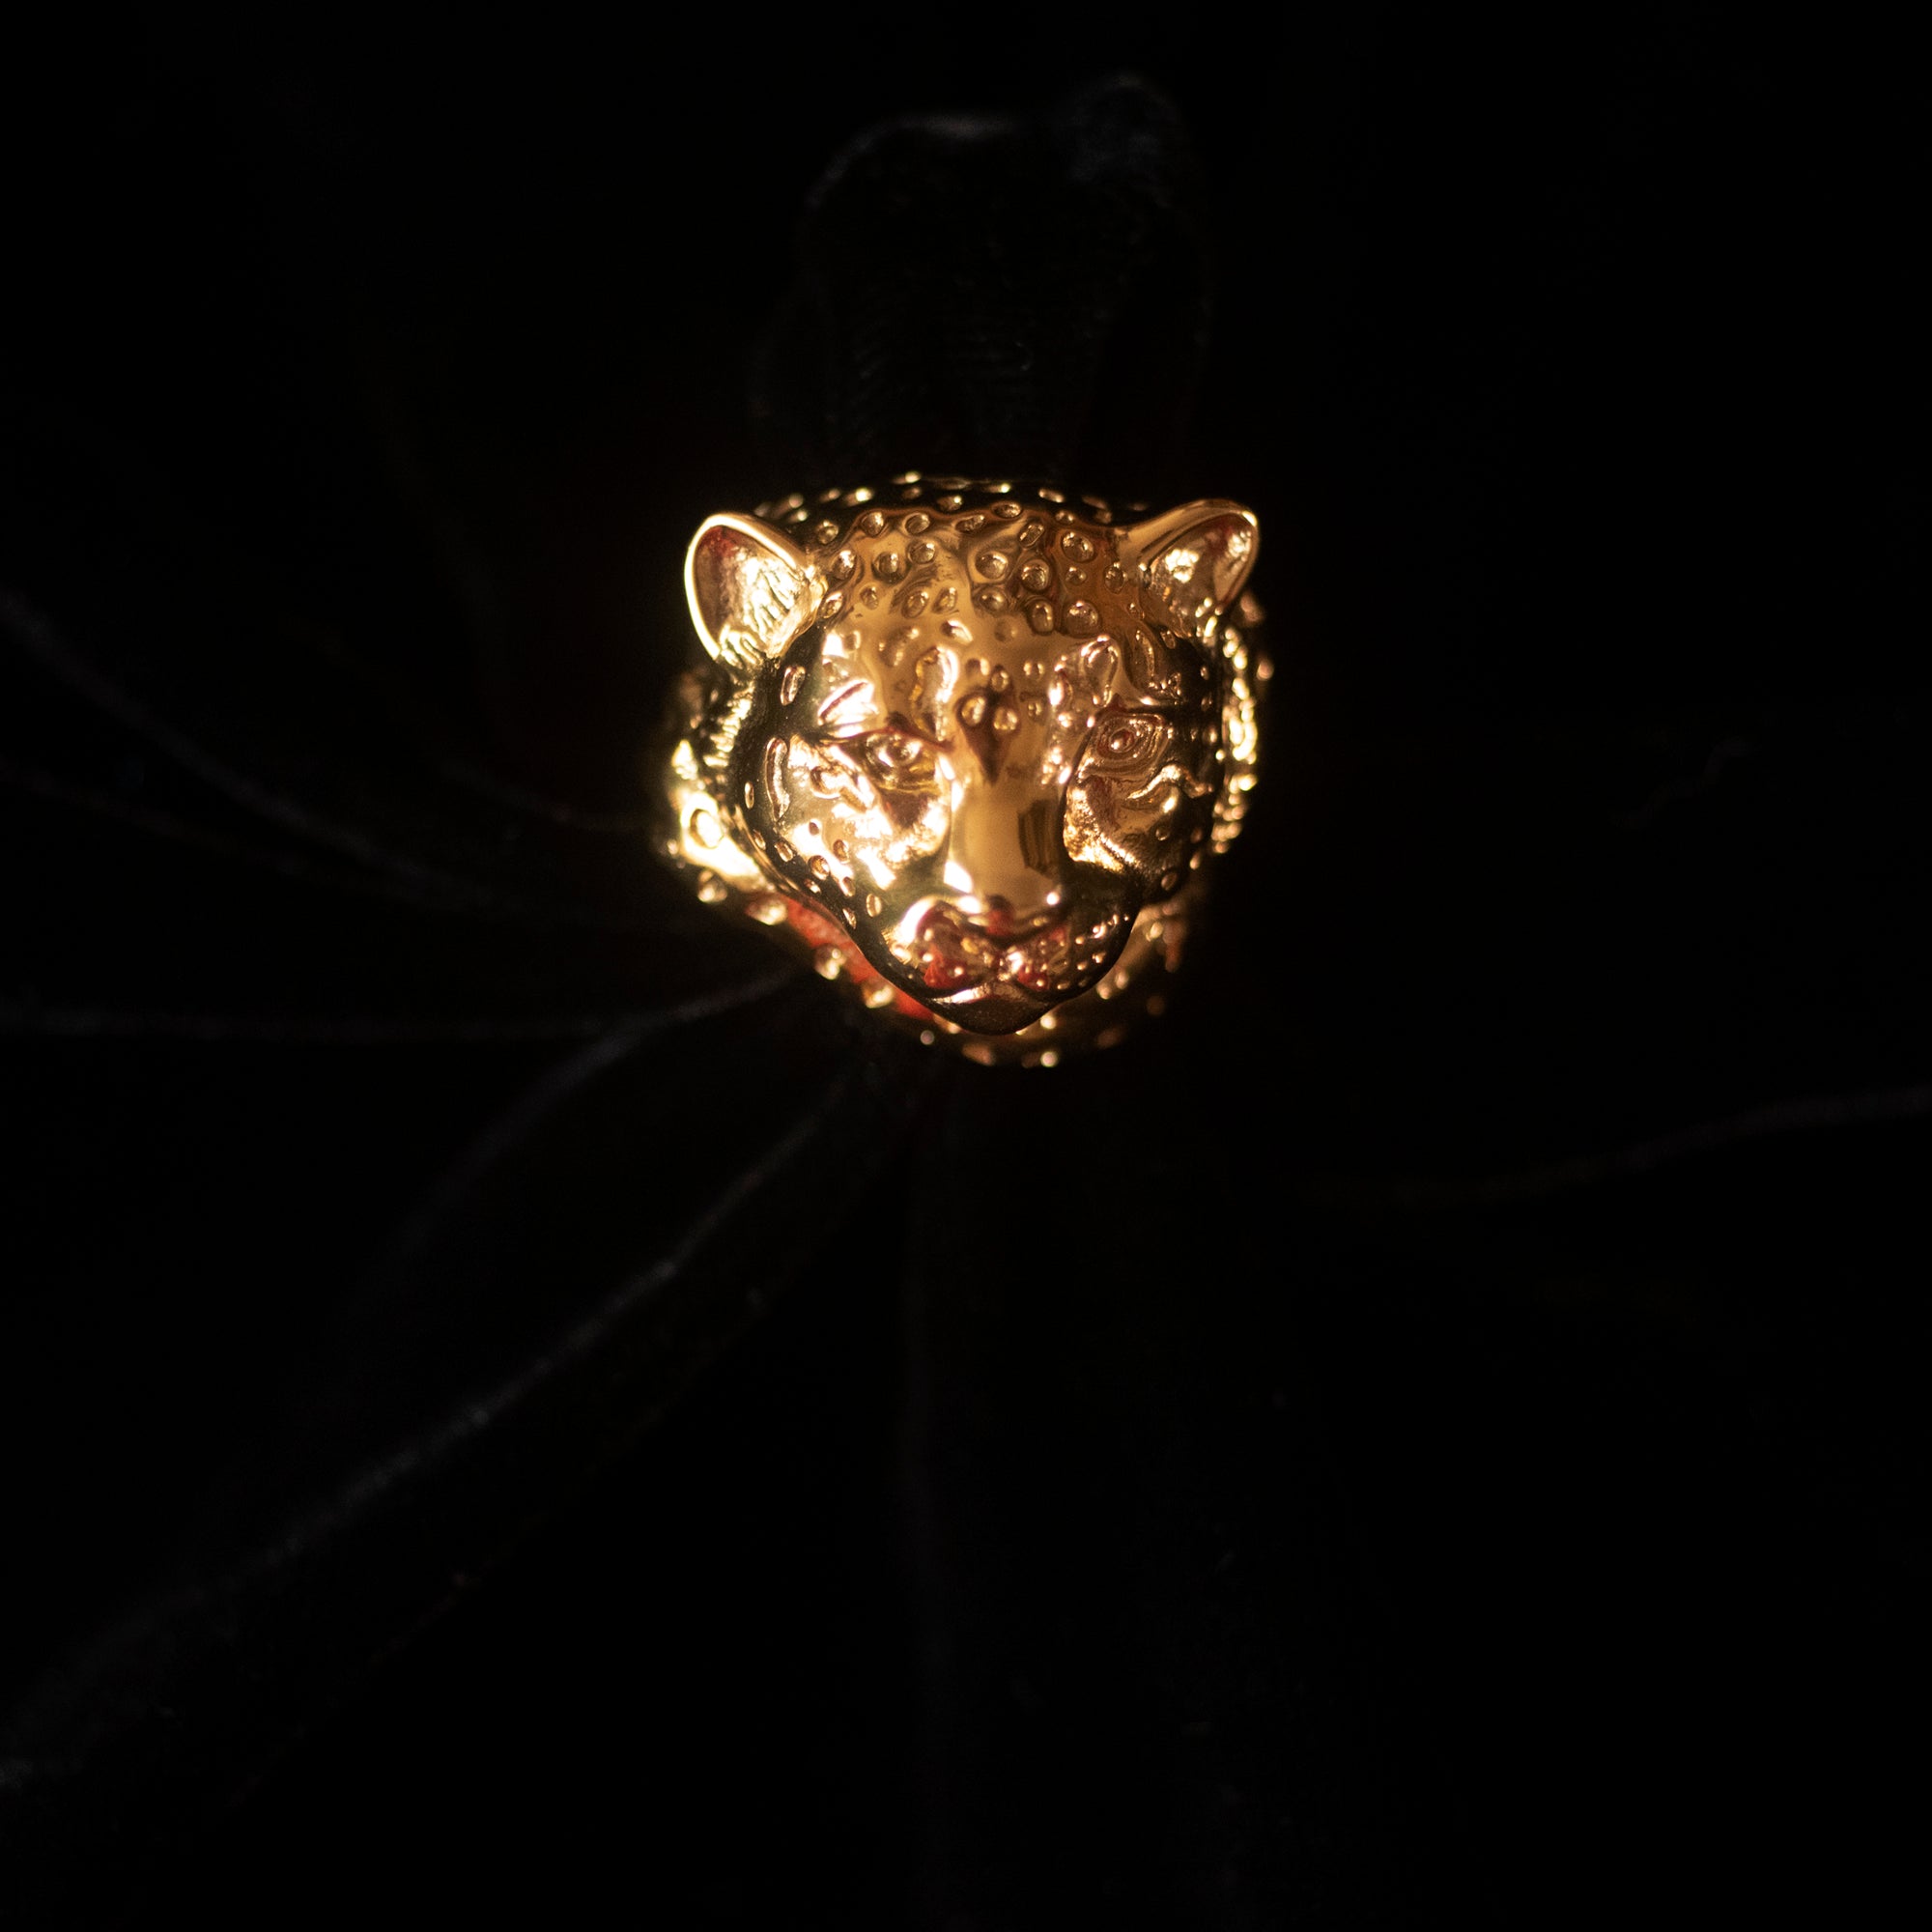 On a black background, sits a gold ring in the shape of a snow leopard.